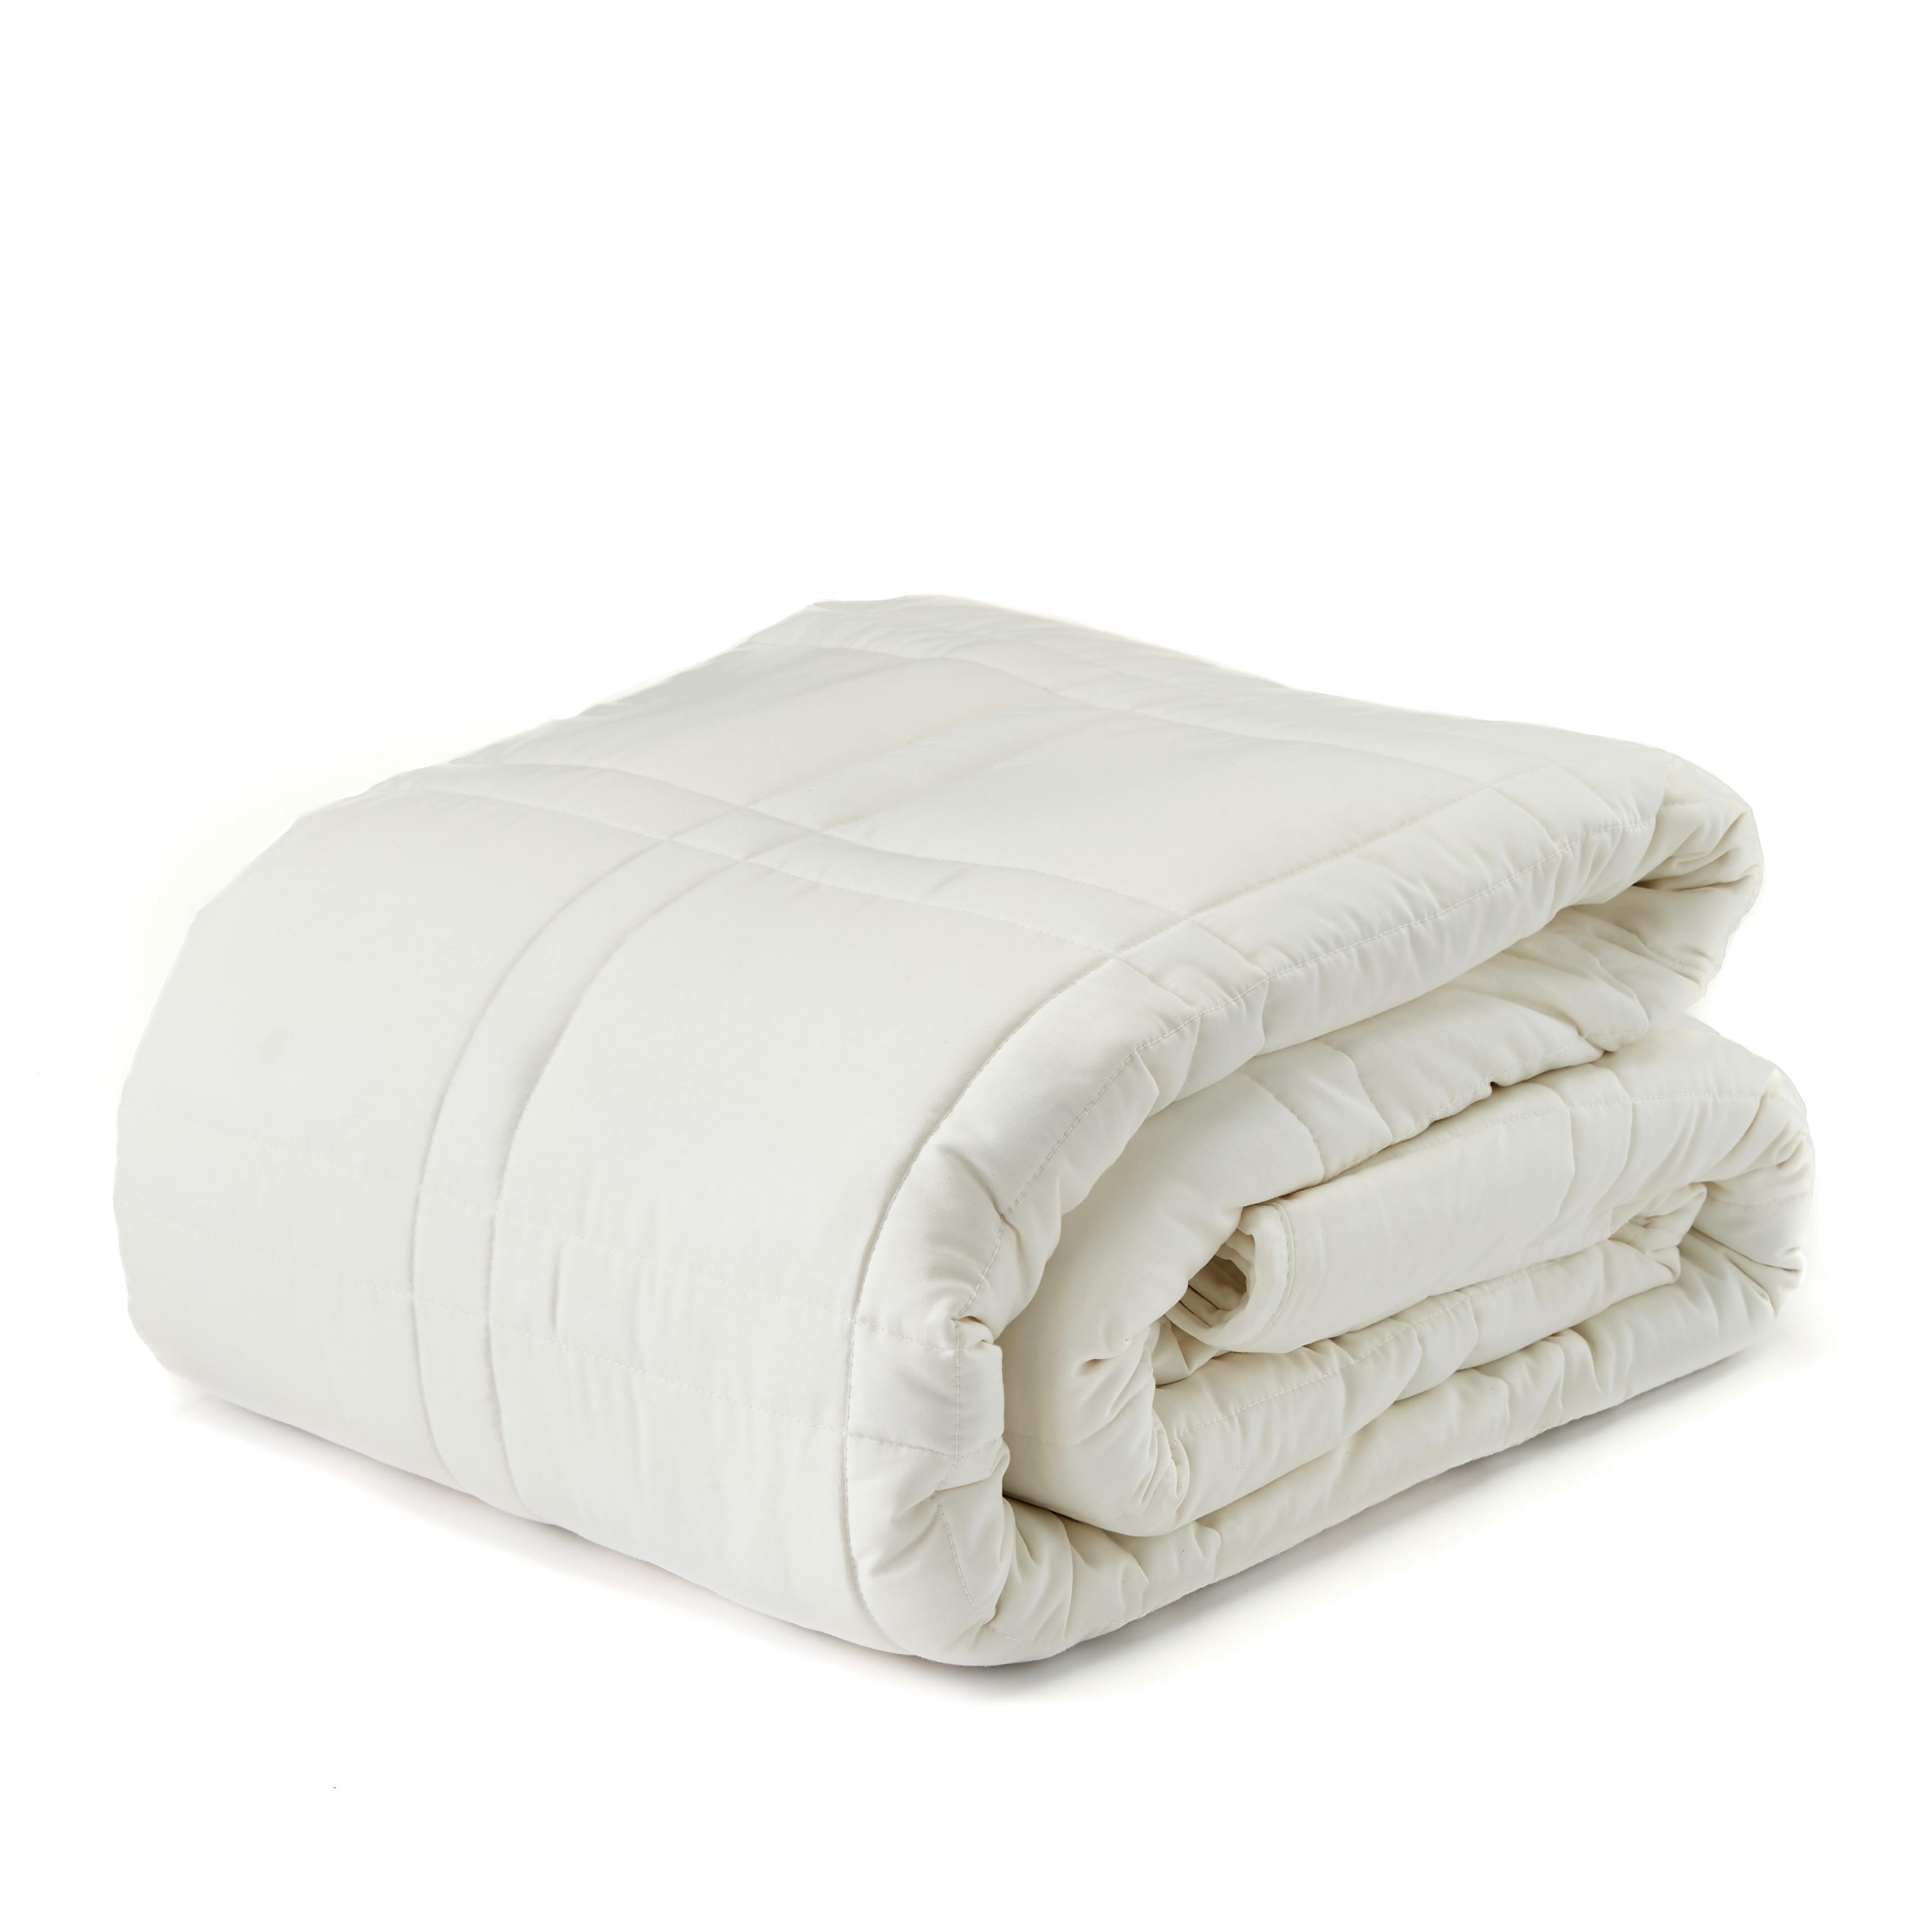 25 lb Weighted Comforter - King